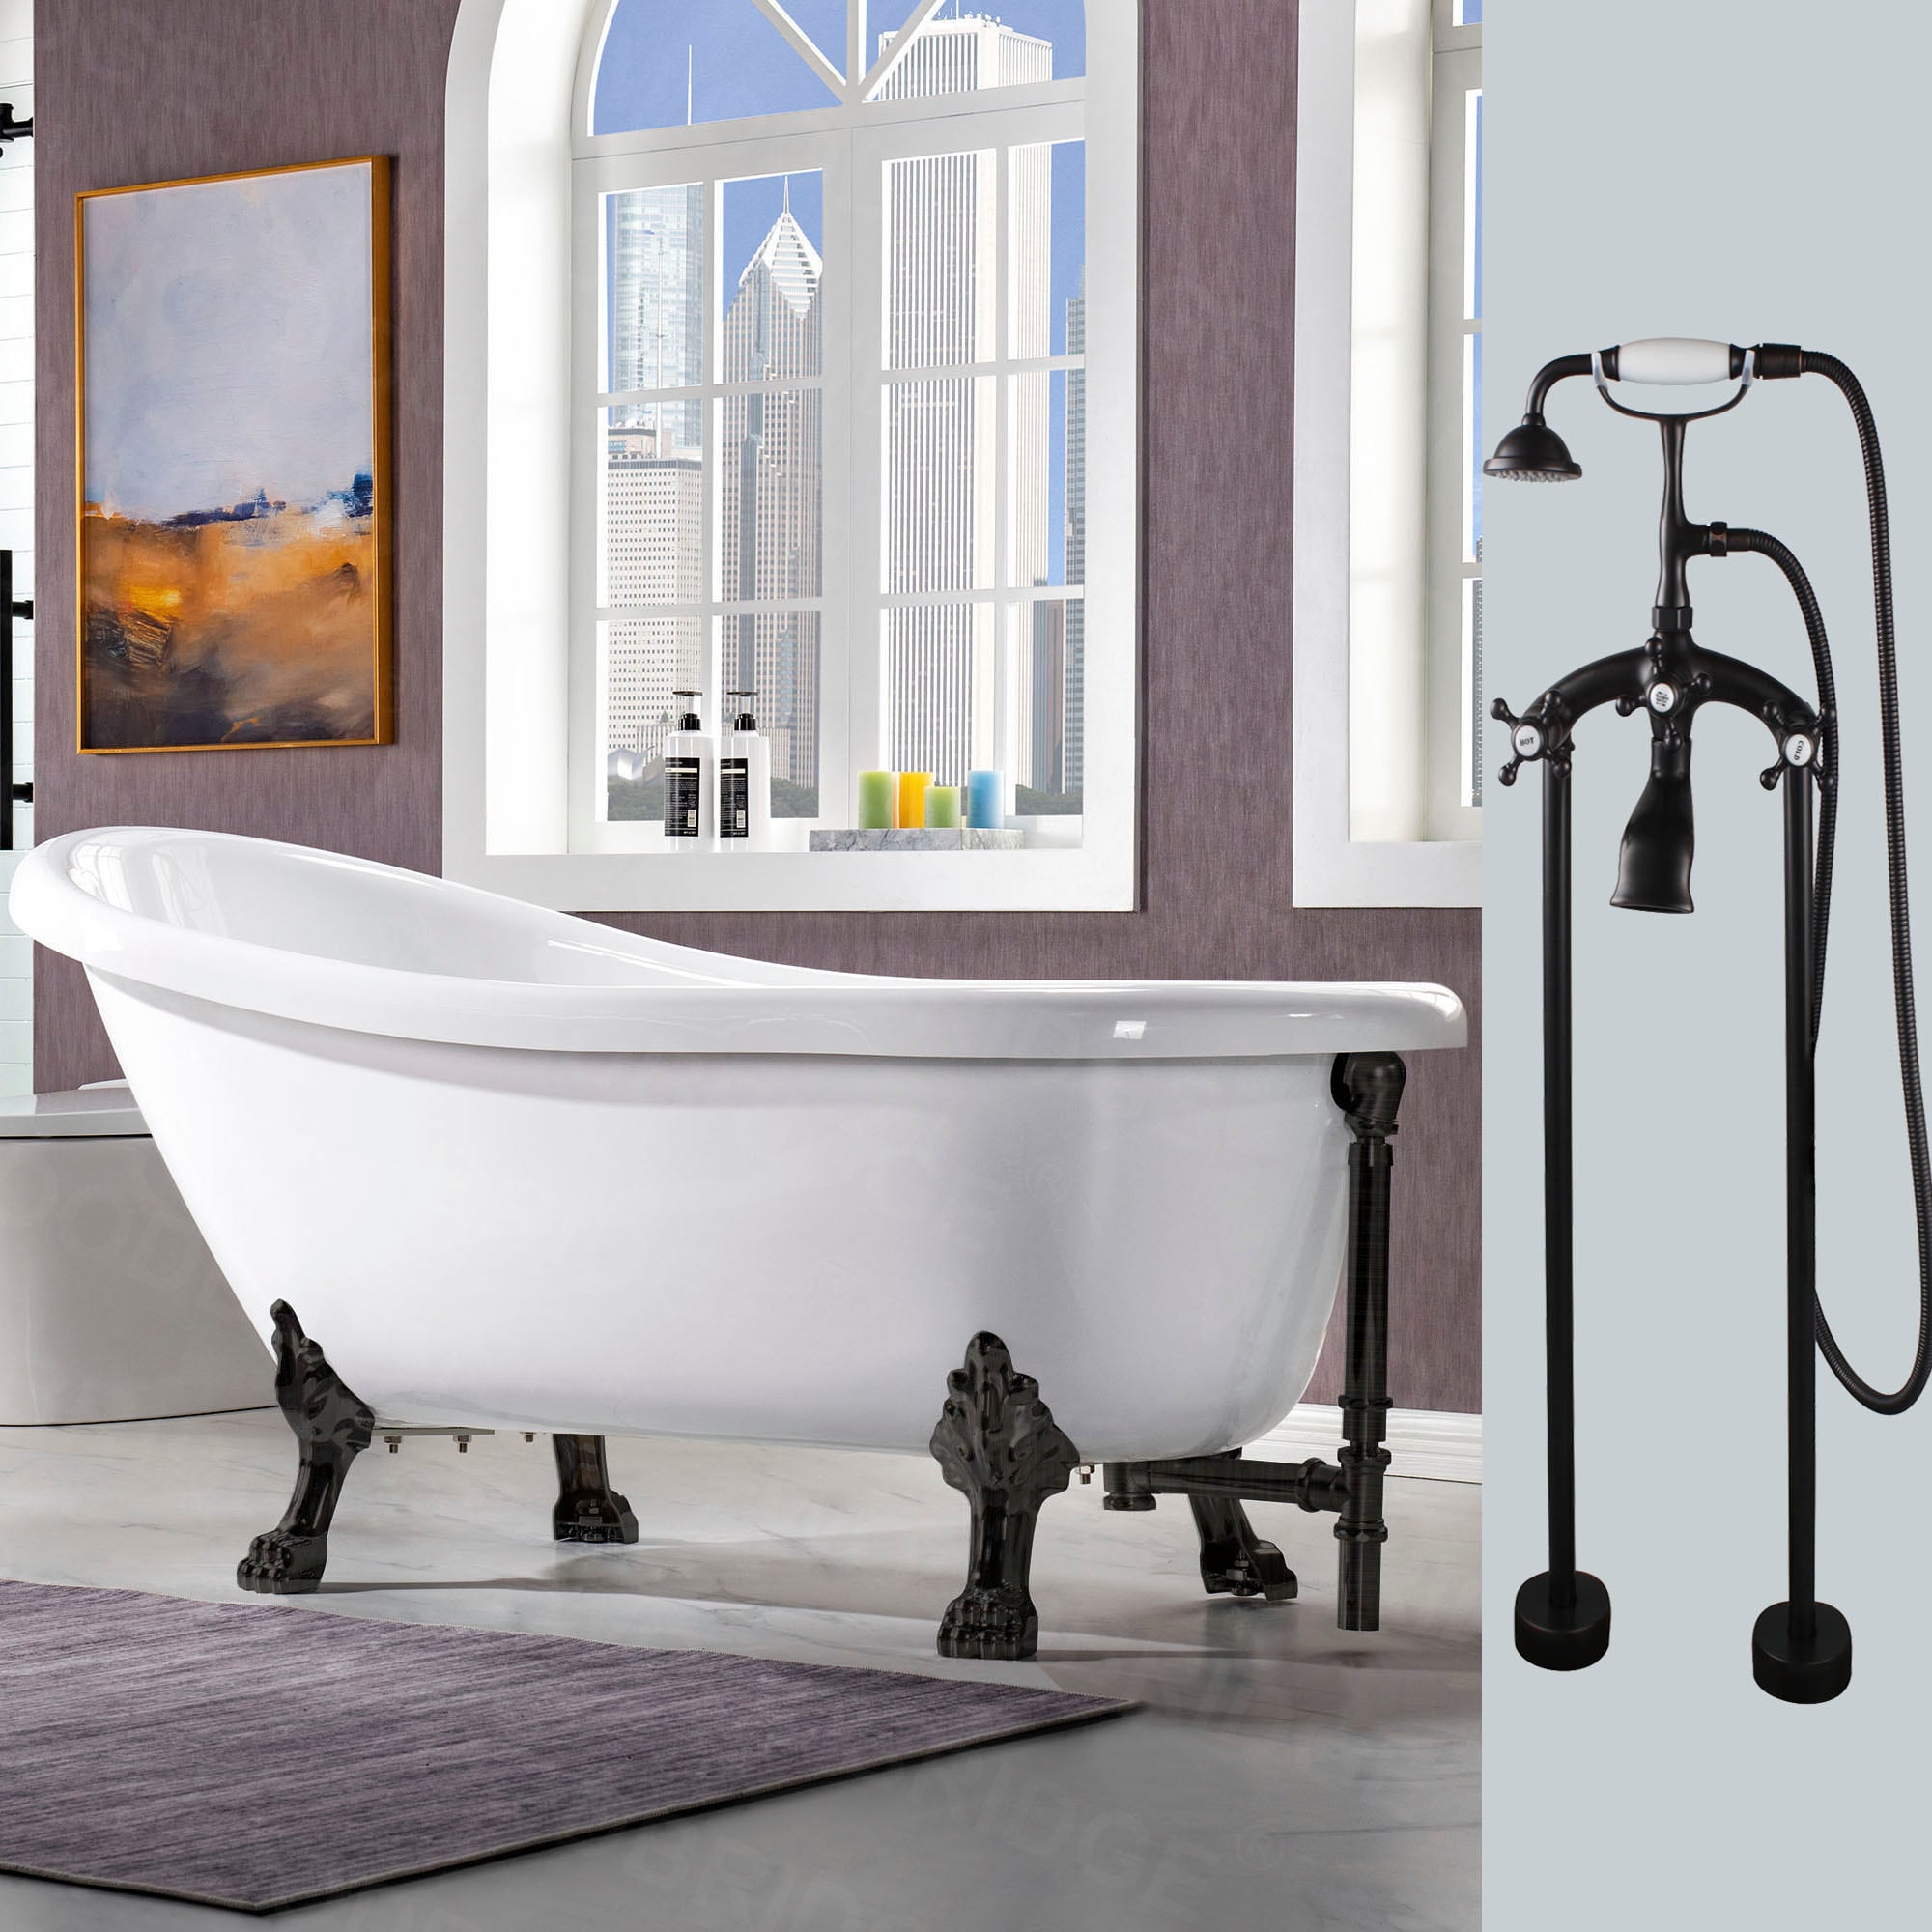 Woodbridge Albi 29.875-in x 67-in White with Oil Rubbed Bronze Trim Acrylic Oval Clawfoot Soaking Bathtub with Faucet and Drain (Reversible Drain) -  LB199